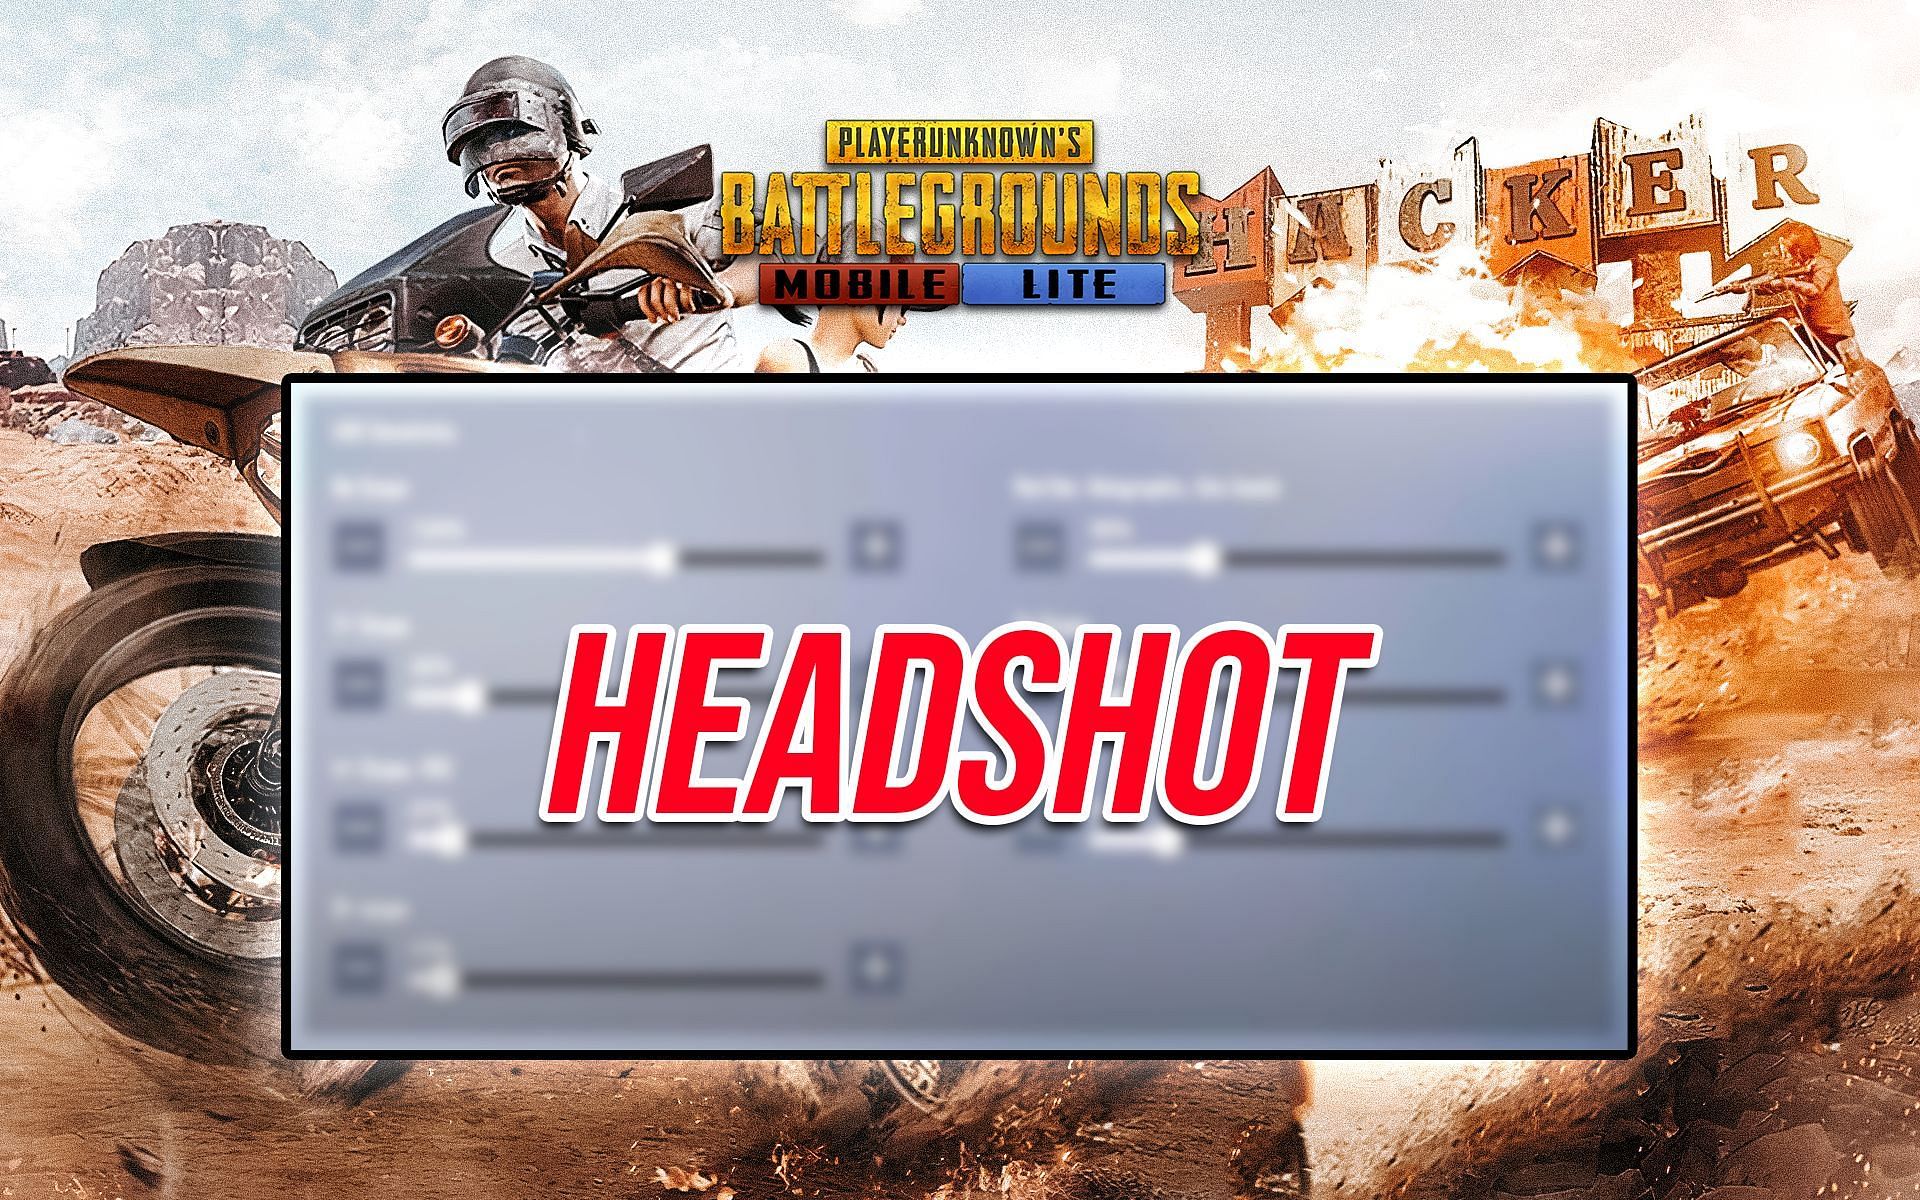 PUBG Mobile Lite sensitivity for maximum headshots and no recoil on Android devices